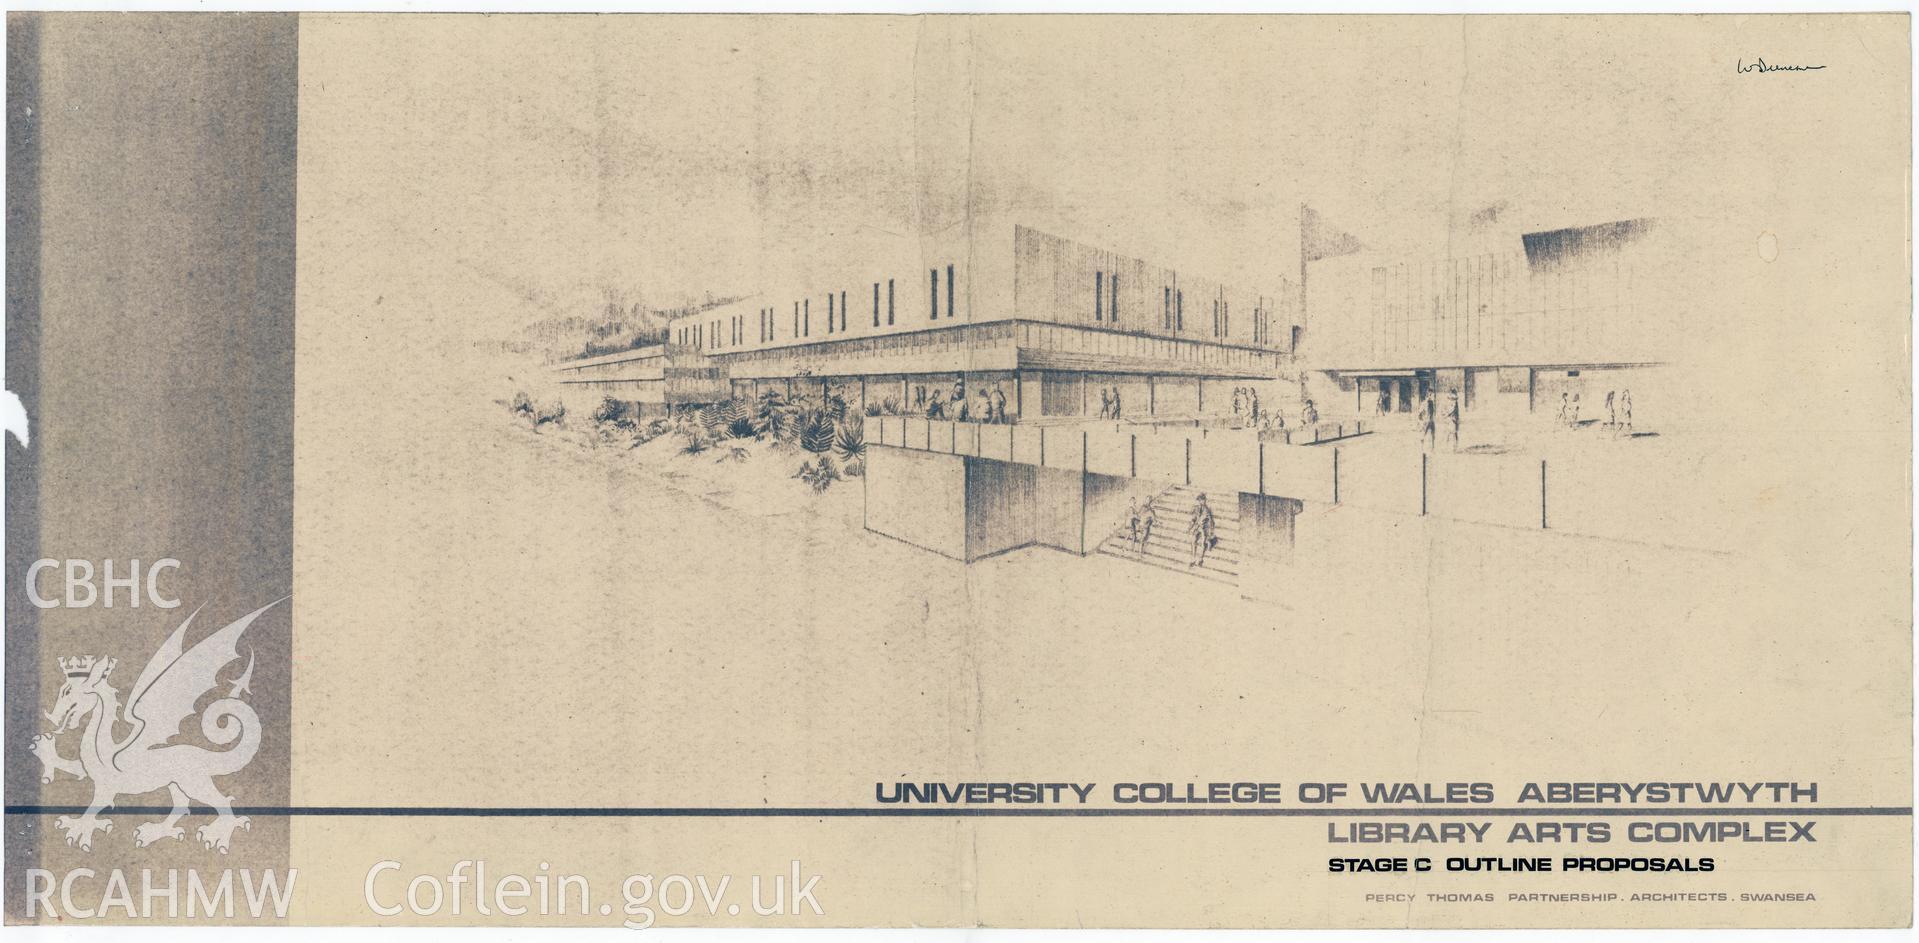 Digital copy of a perspective view of the proposed Library Arts Complex at University College Aberystwyth, produced by Percy Thomas Partnership.